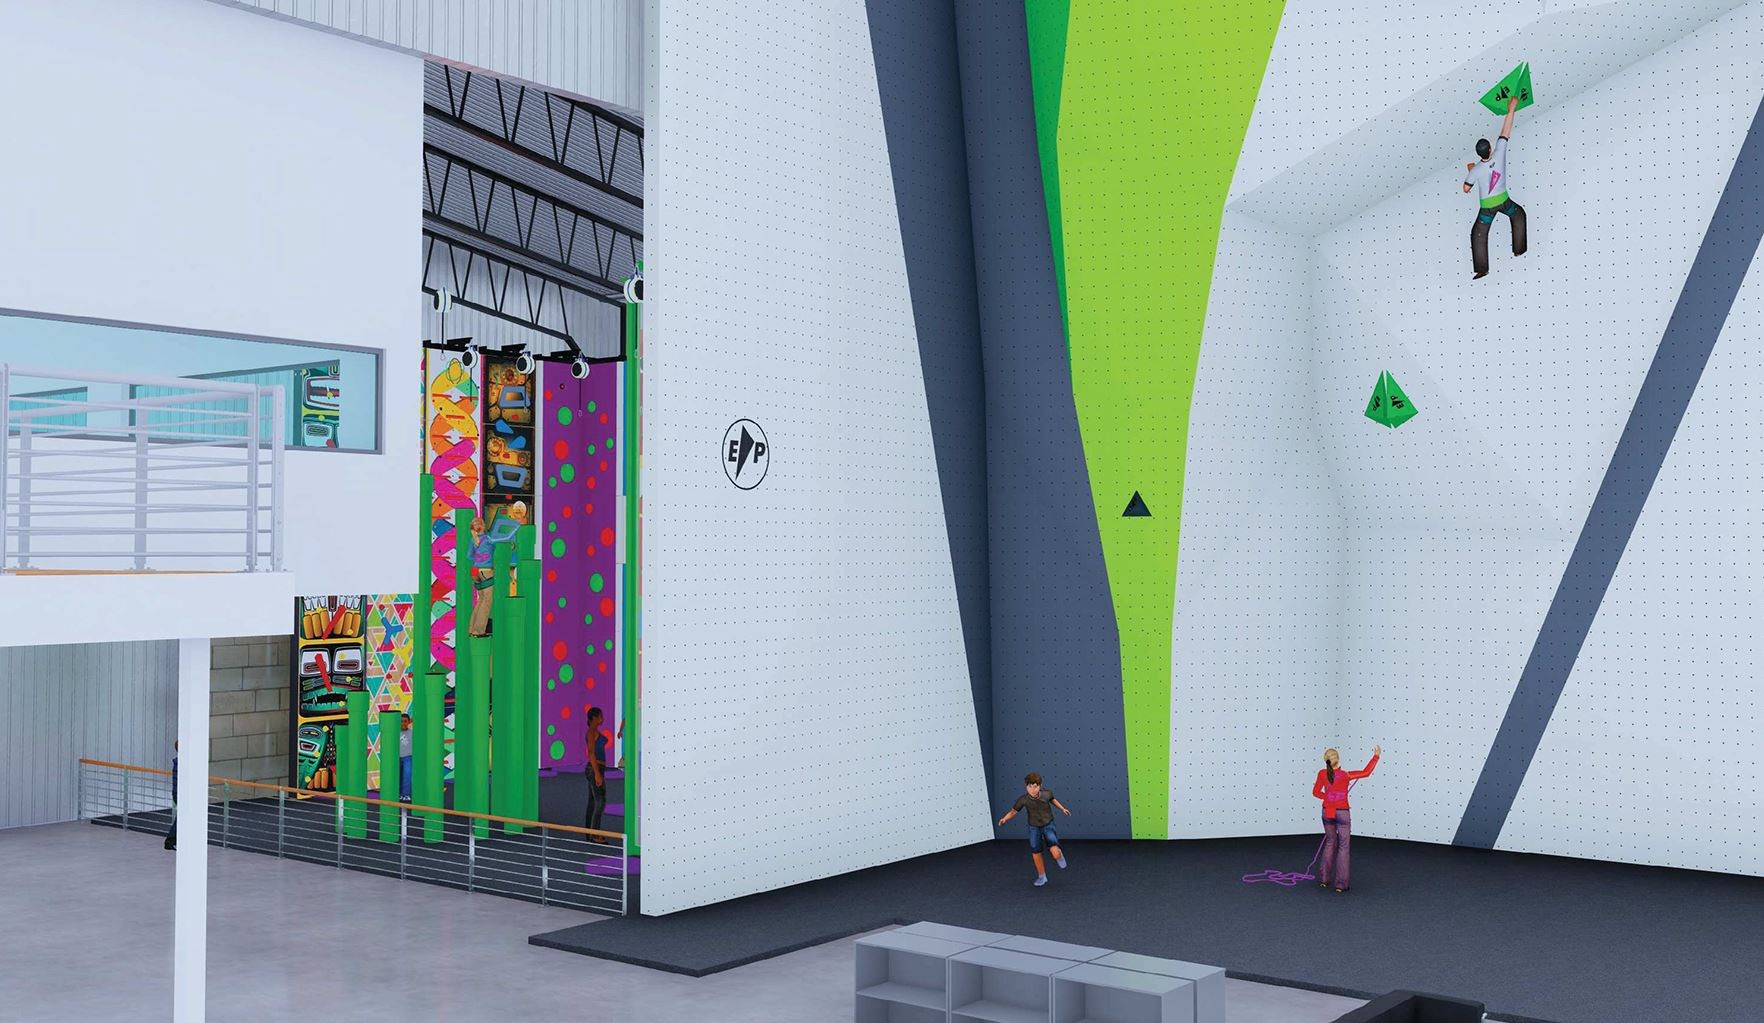 The proposed venture would include climbing walls, a café, a high-performance gym and fitness studio, plus a retail outlet.